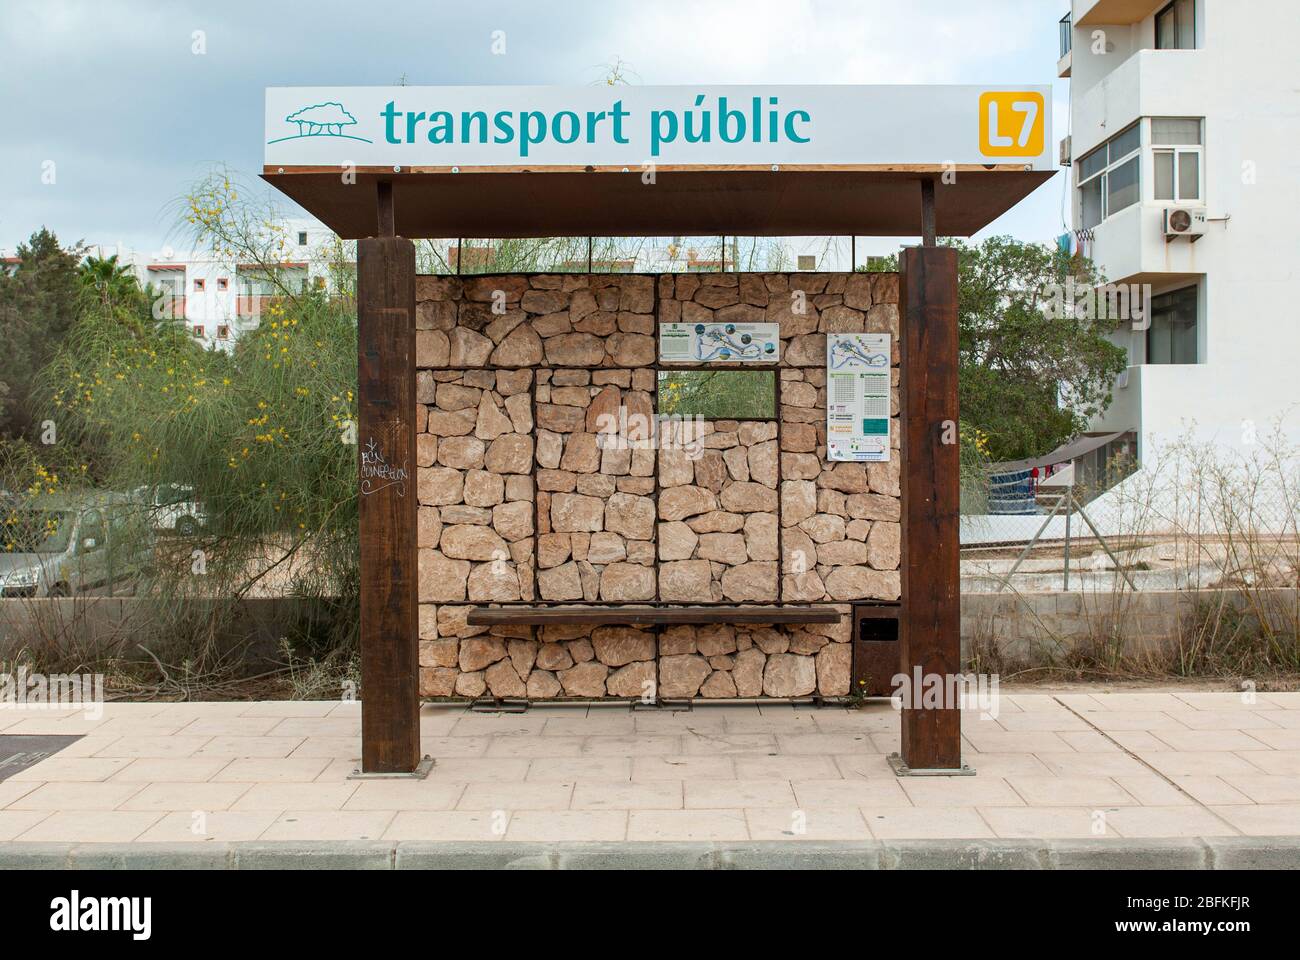 Es Pujols, Formentera, Balearic Island, Spain. Bus stop in wood and stone of the public transport that connects the various places of the island. Stock Photo